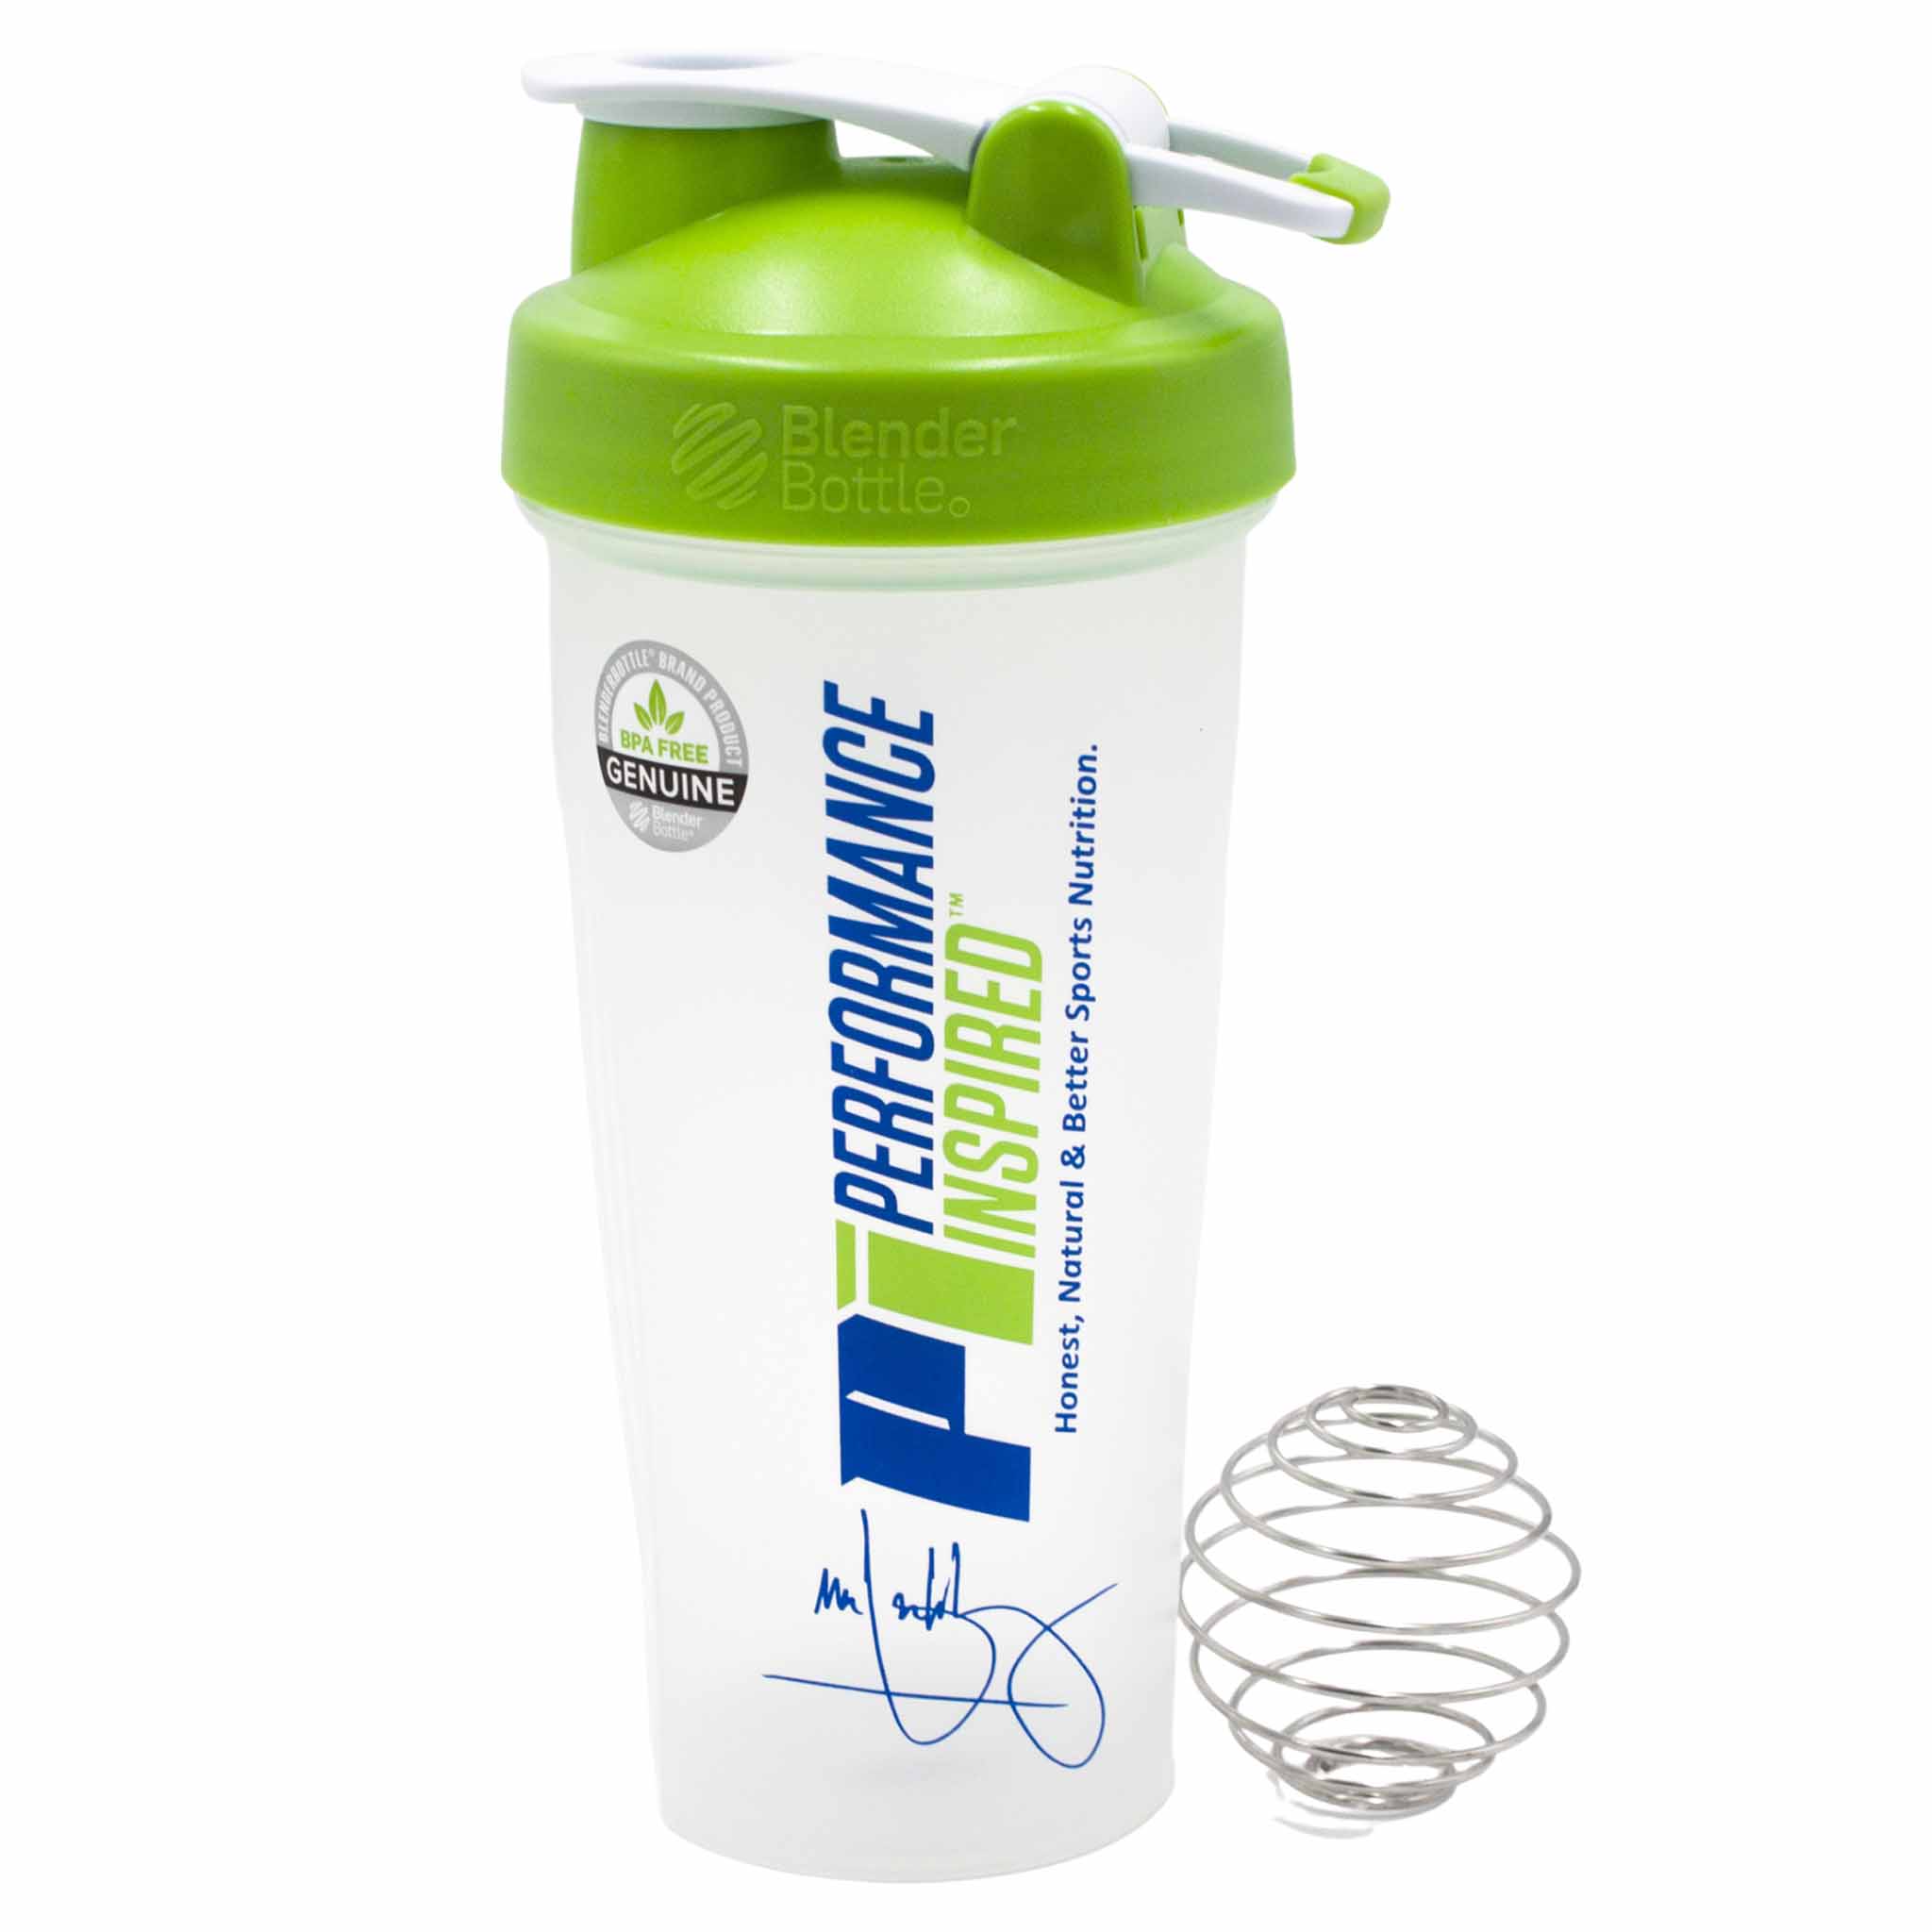  herbalife Shaker Bottle Cup supplements beater for mixing the  original